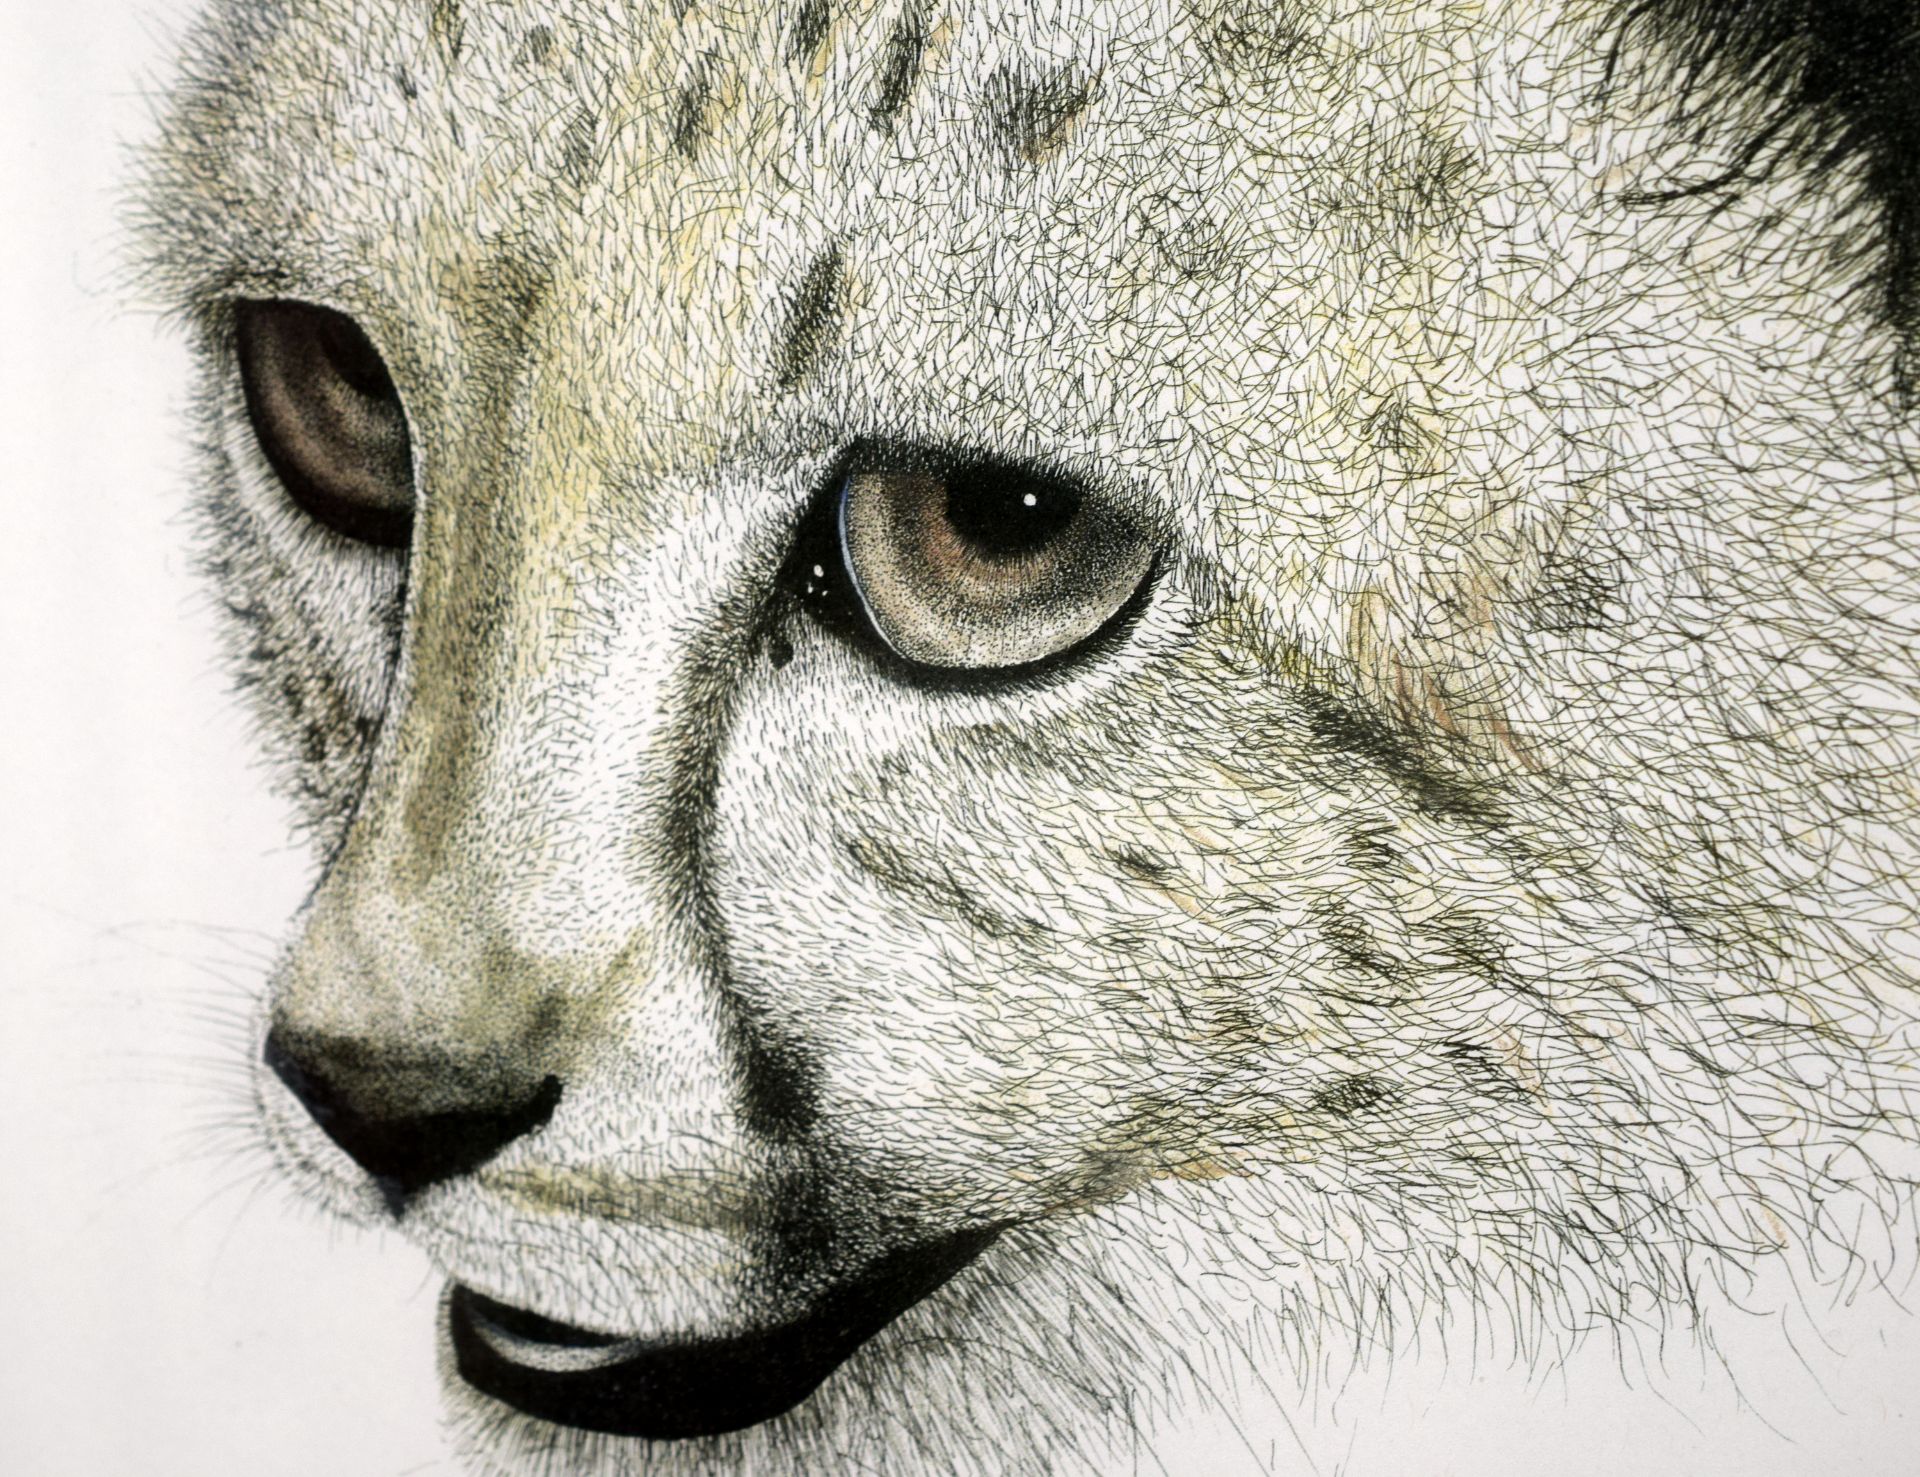 Limited Edition Print 1 of 4 of Cheetah Cub by Llanelli Artist Conway Richards. - Image 2 of 3